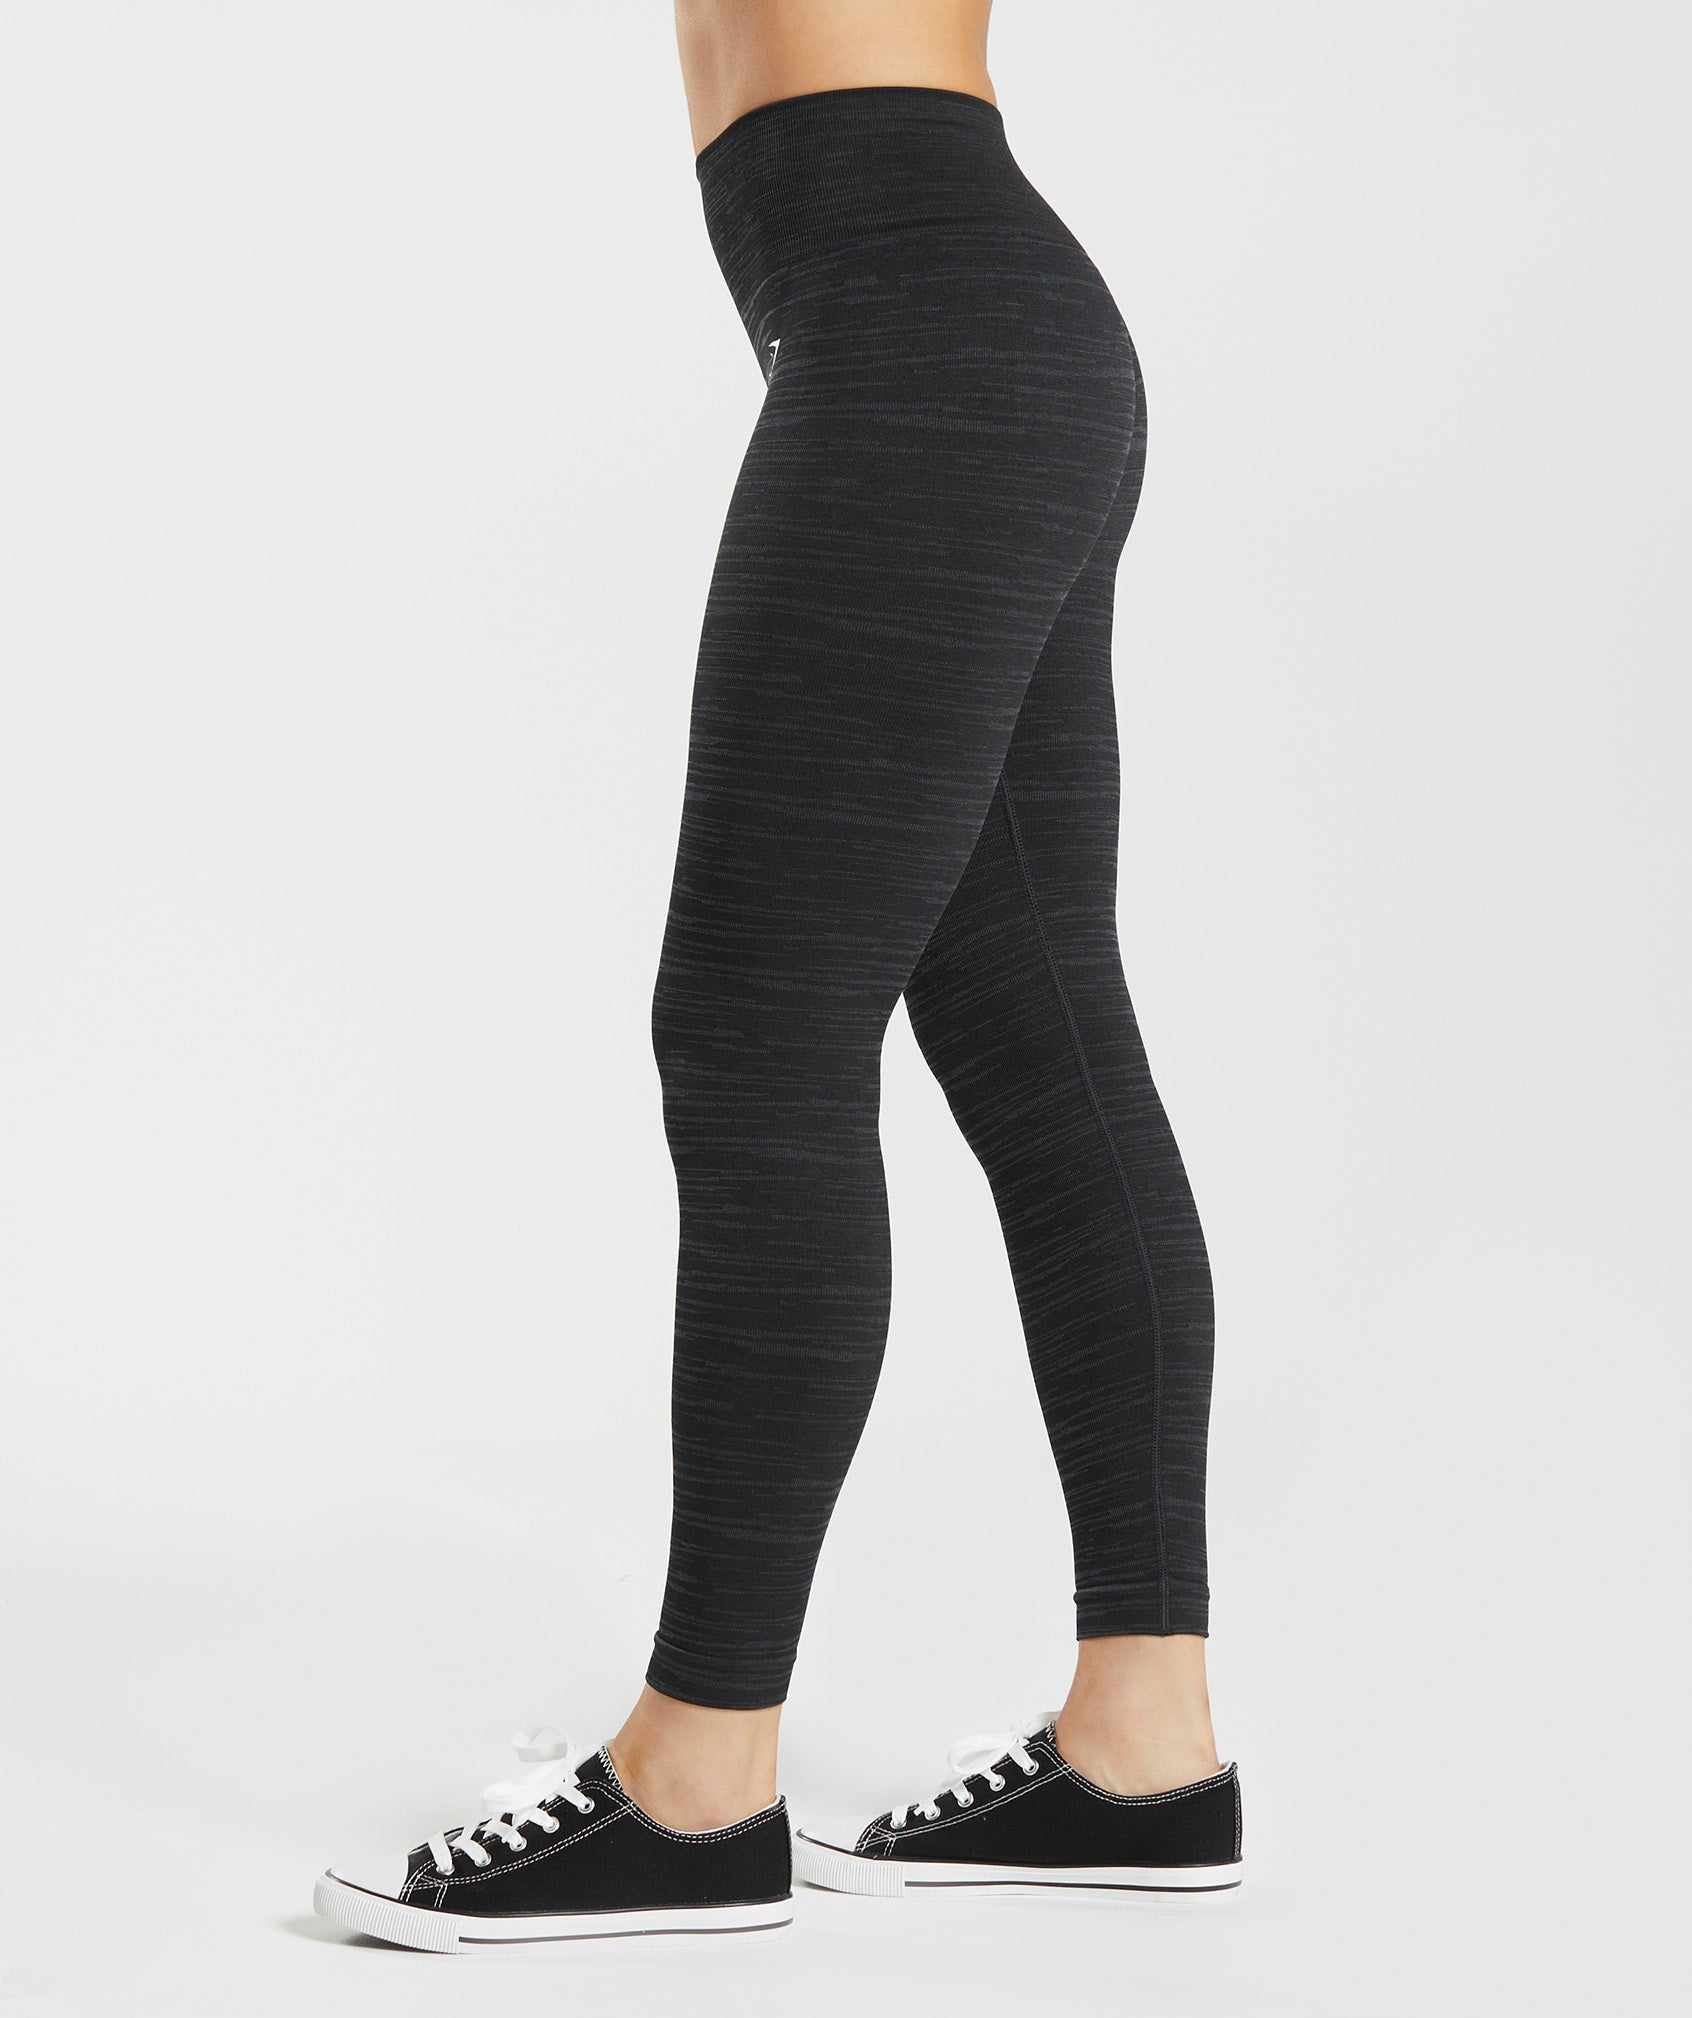 Gymshark Adapt Ombre Seamless Leggings Black Size XS - $45 - From